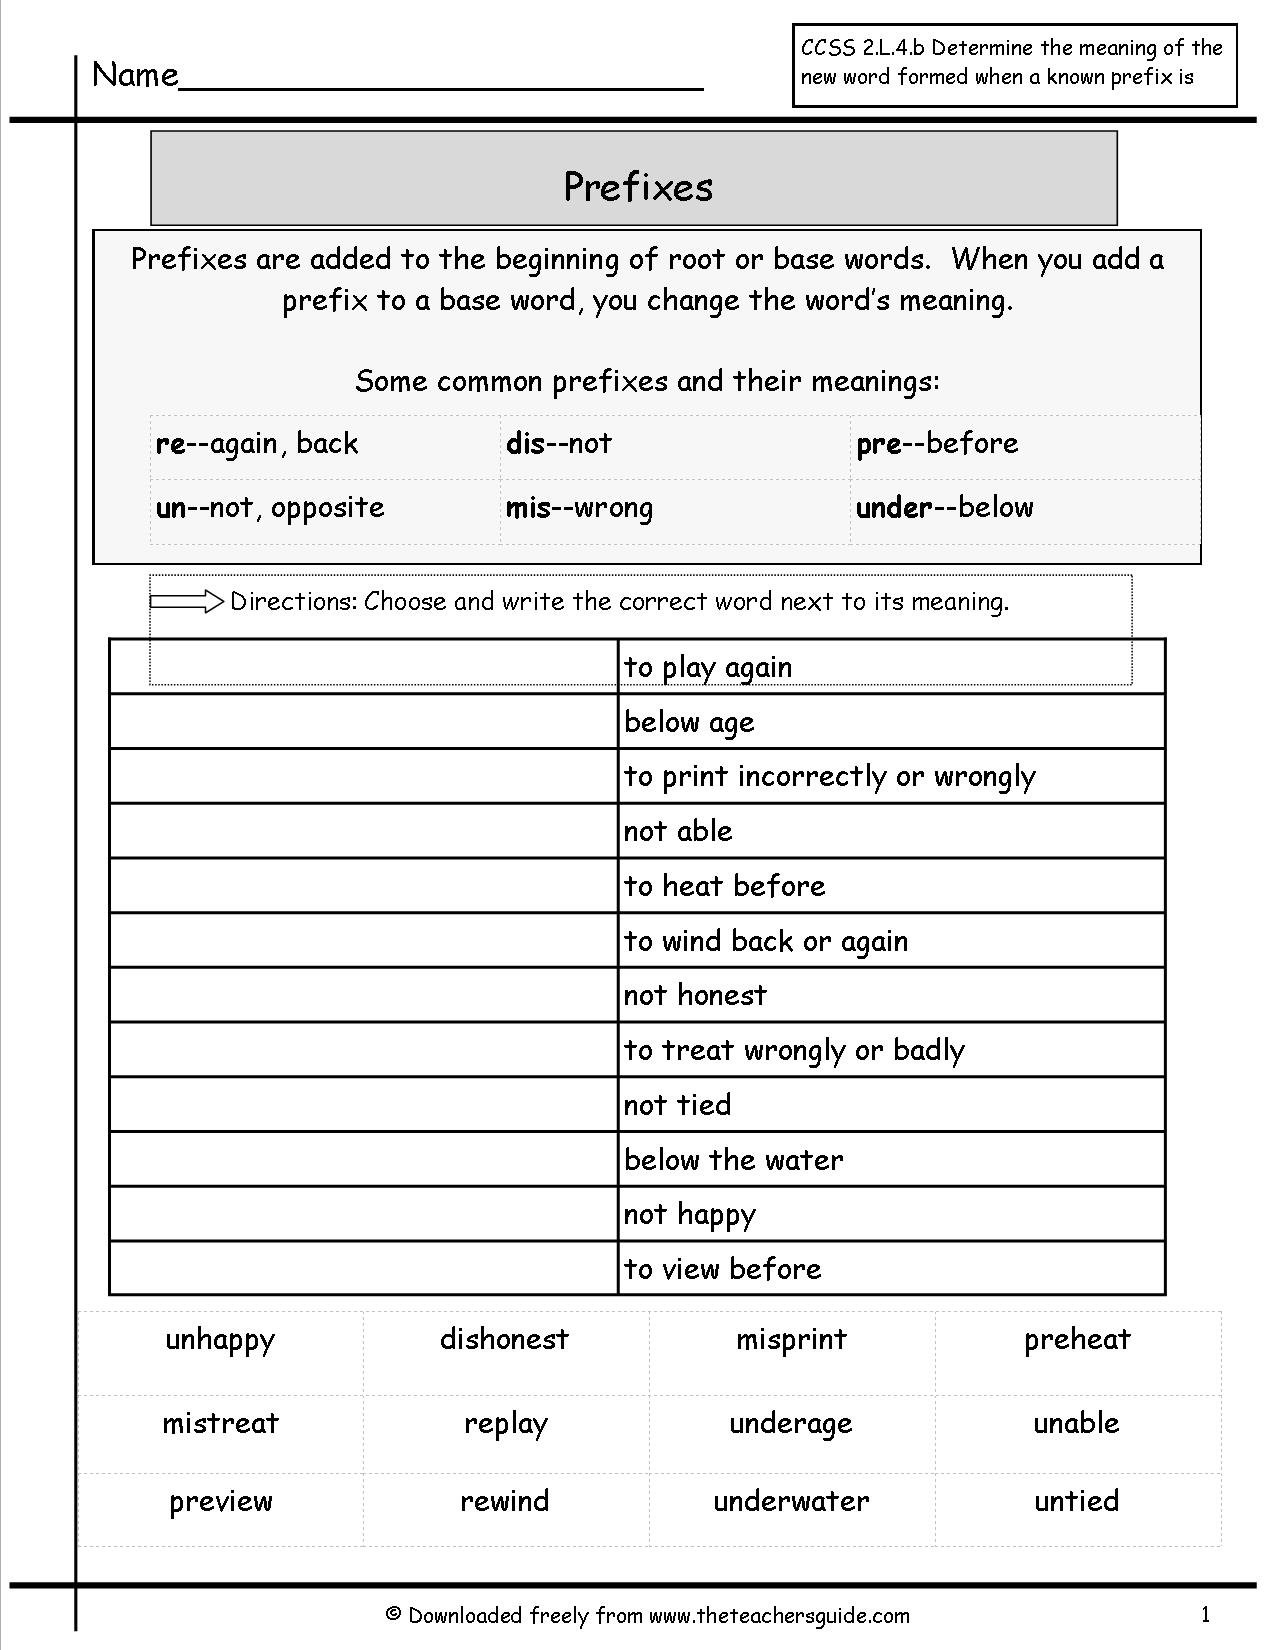 Free Prefixes And Suffixes Worksheets From The Teacher's Guide Along With Prefix Worksheets 3Rd Grade